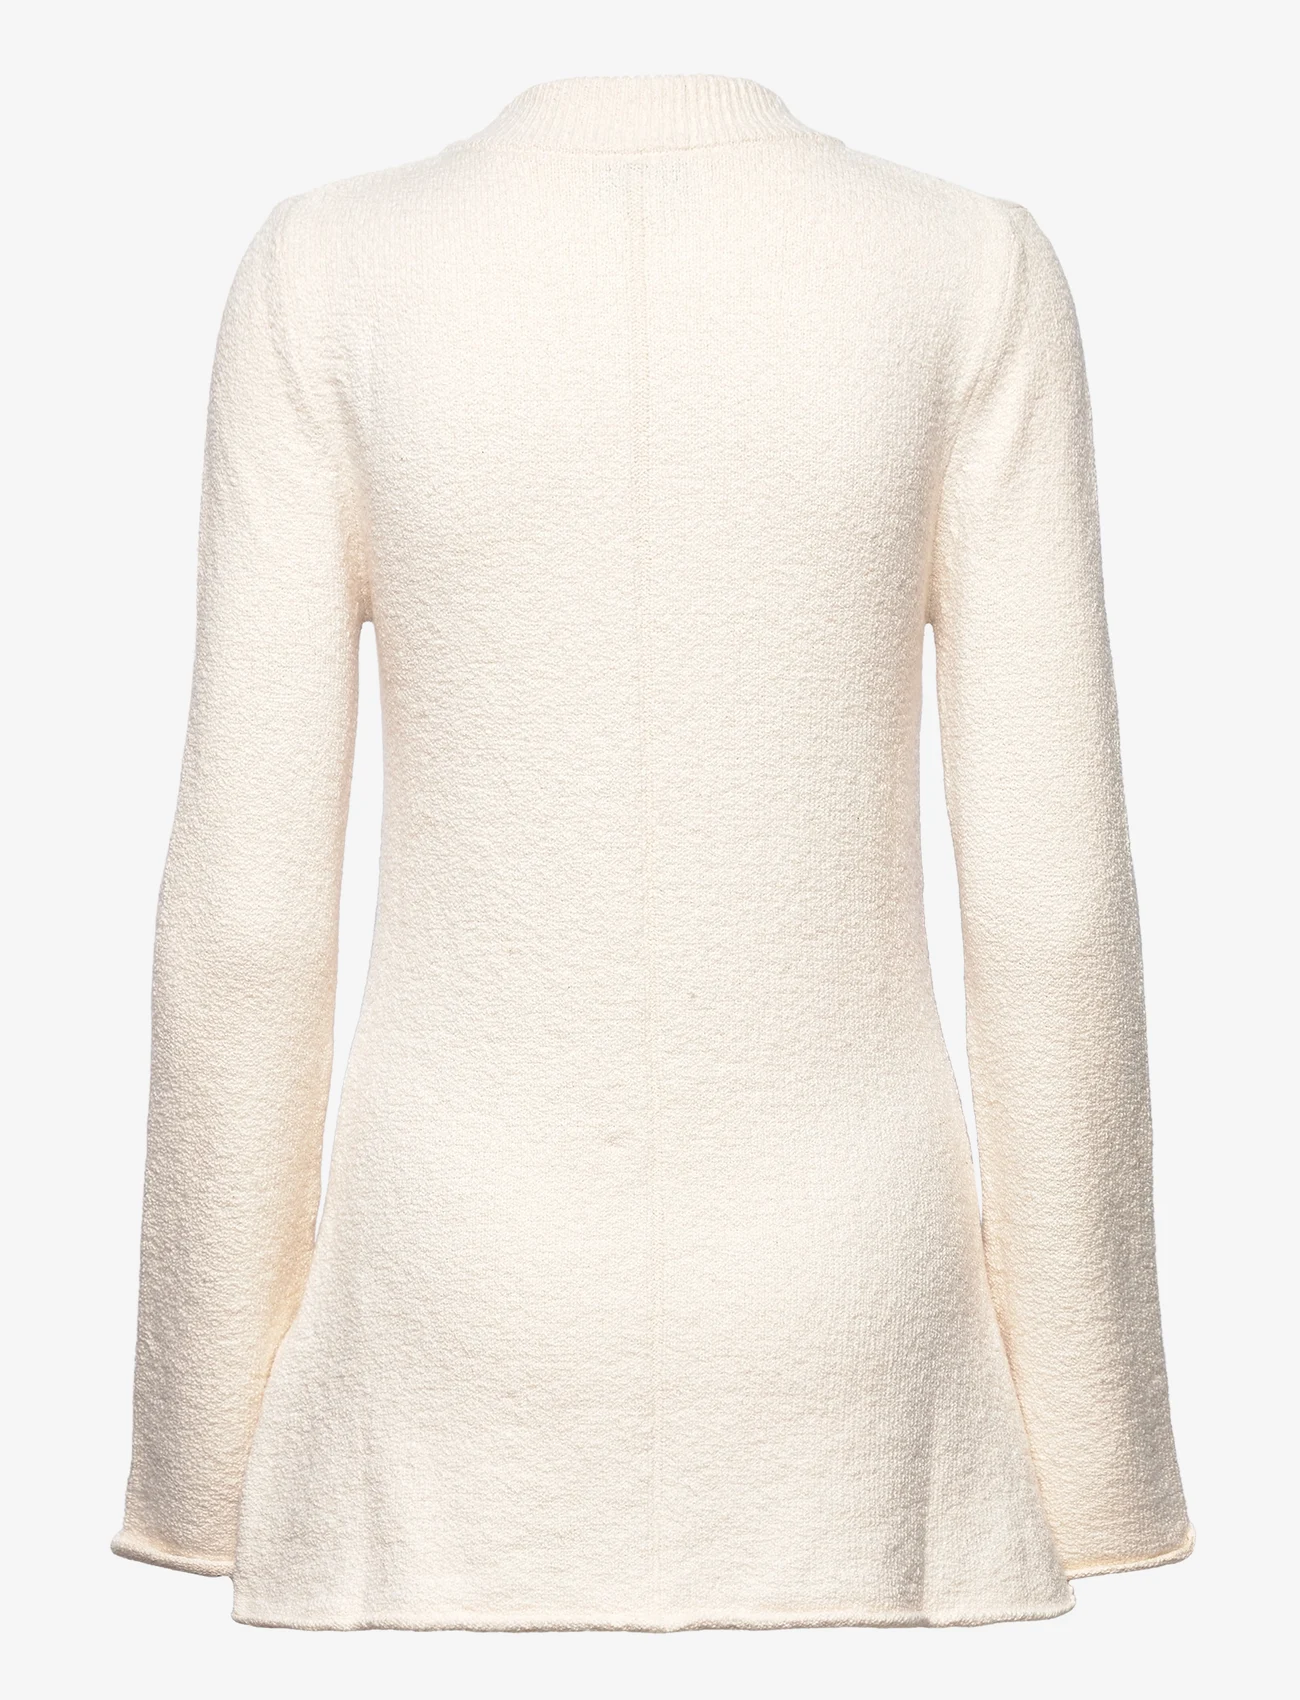 House Of Dagmar - Erina Top - pullover - ivory - 1